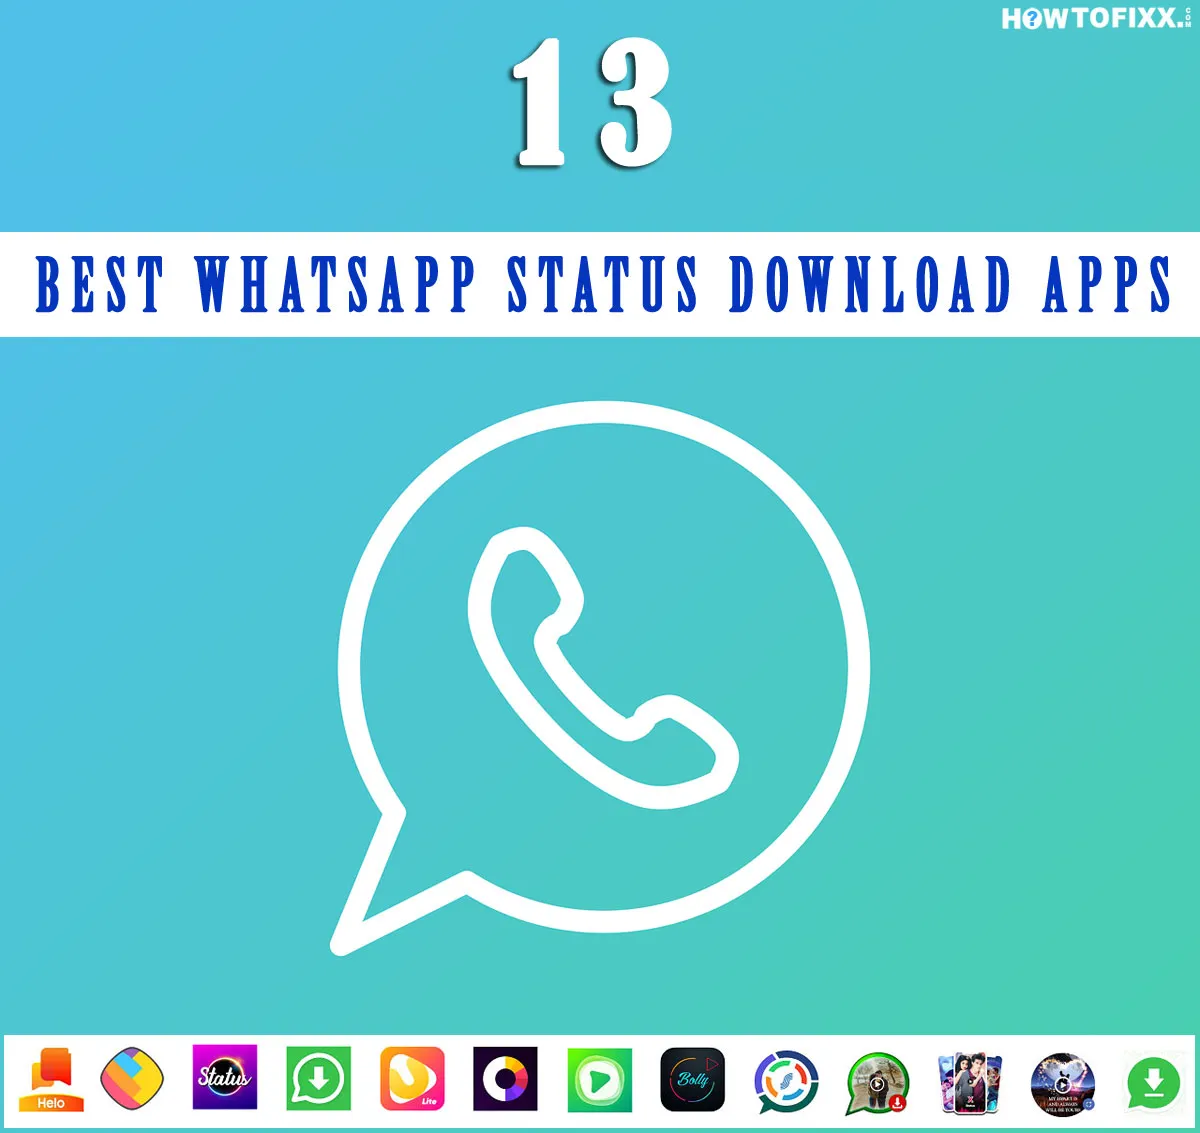 10 Best Whatsapp Status Download App for (Android & iOS)